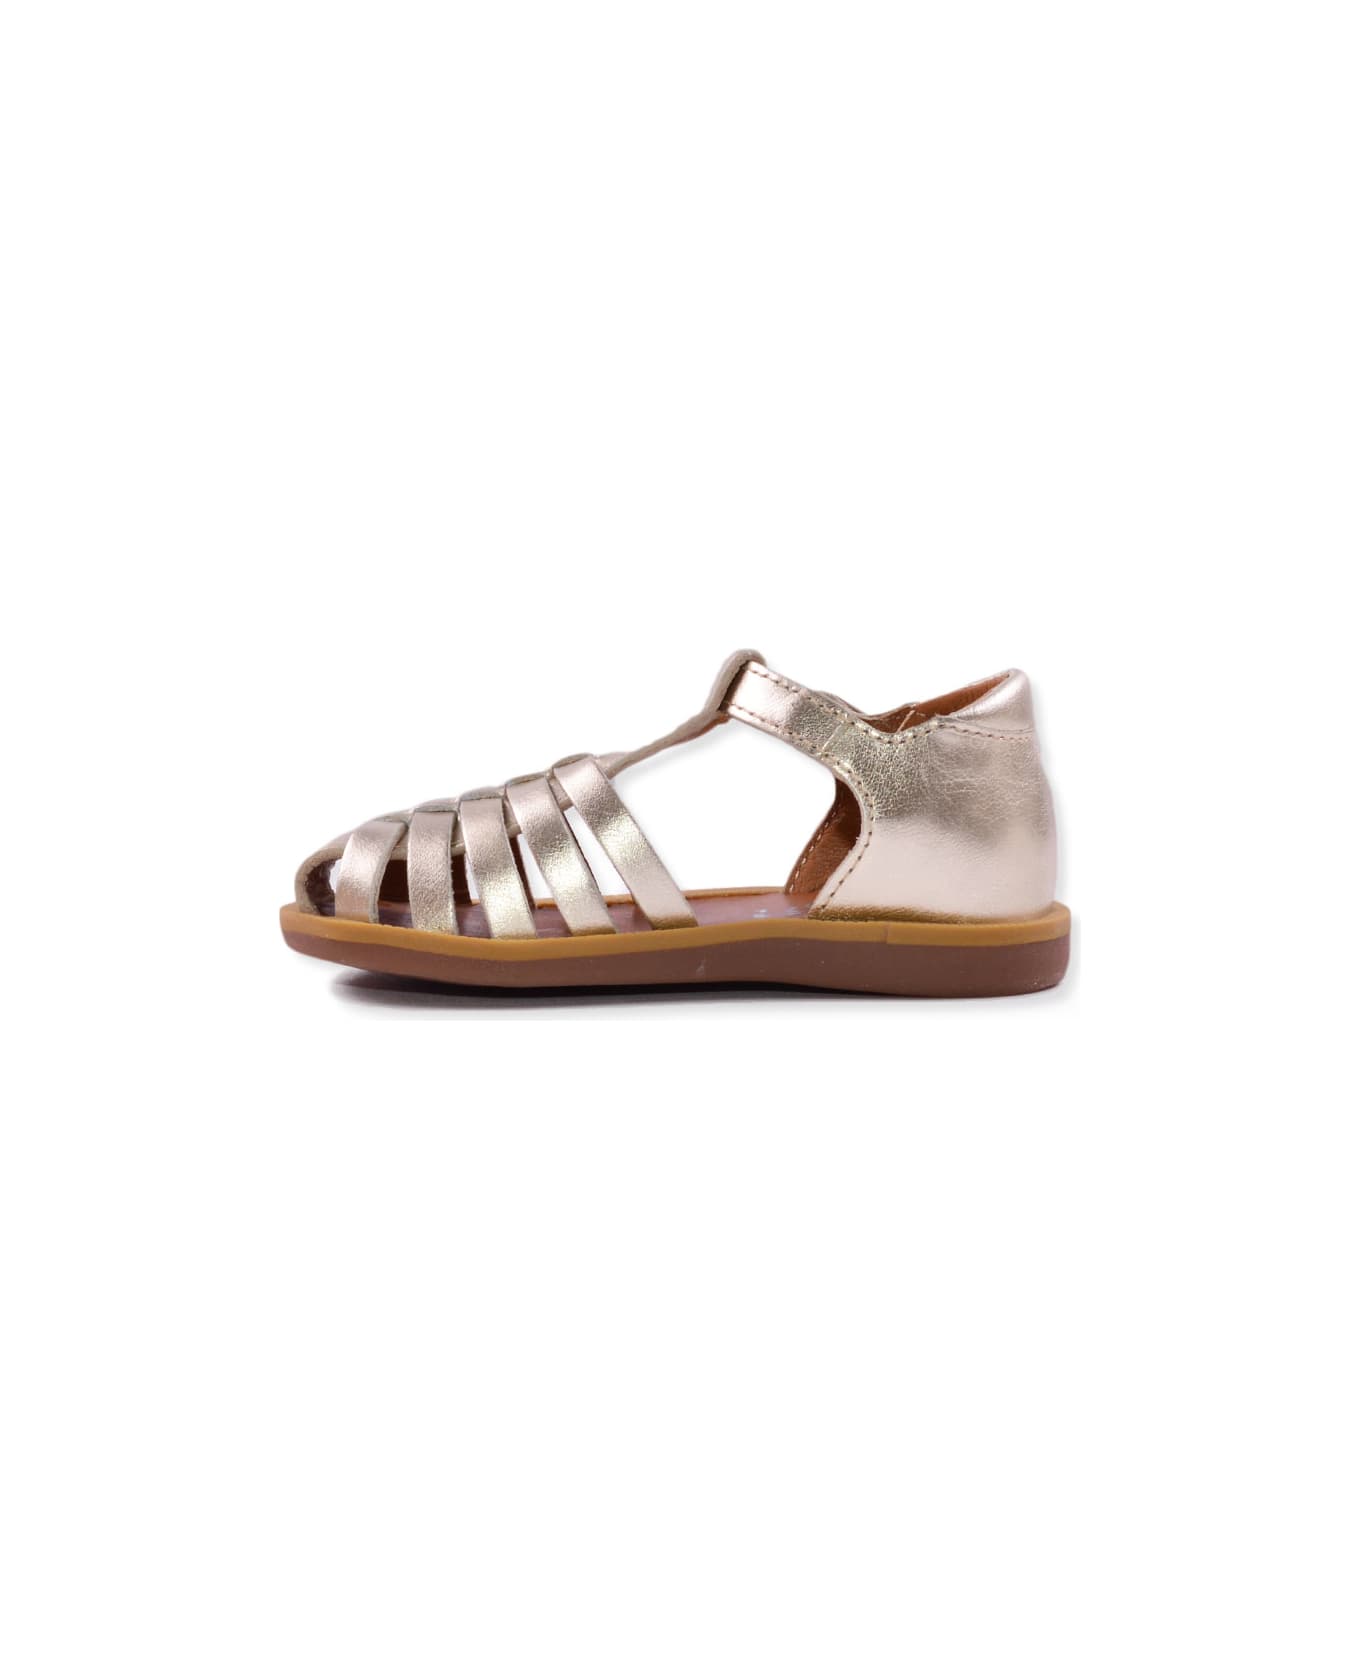 Pom d'Api Sandals In Changing Leather - Grey